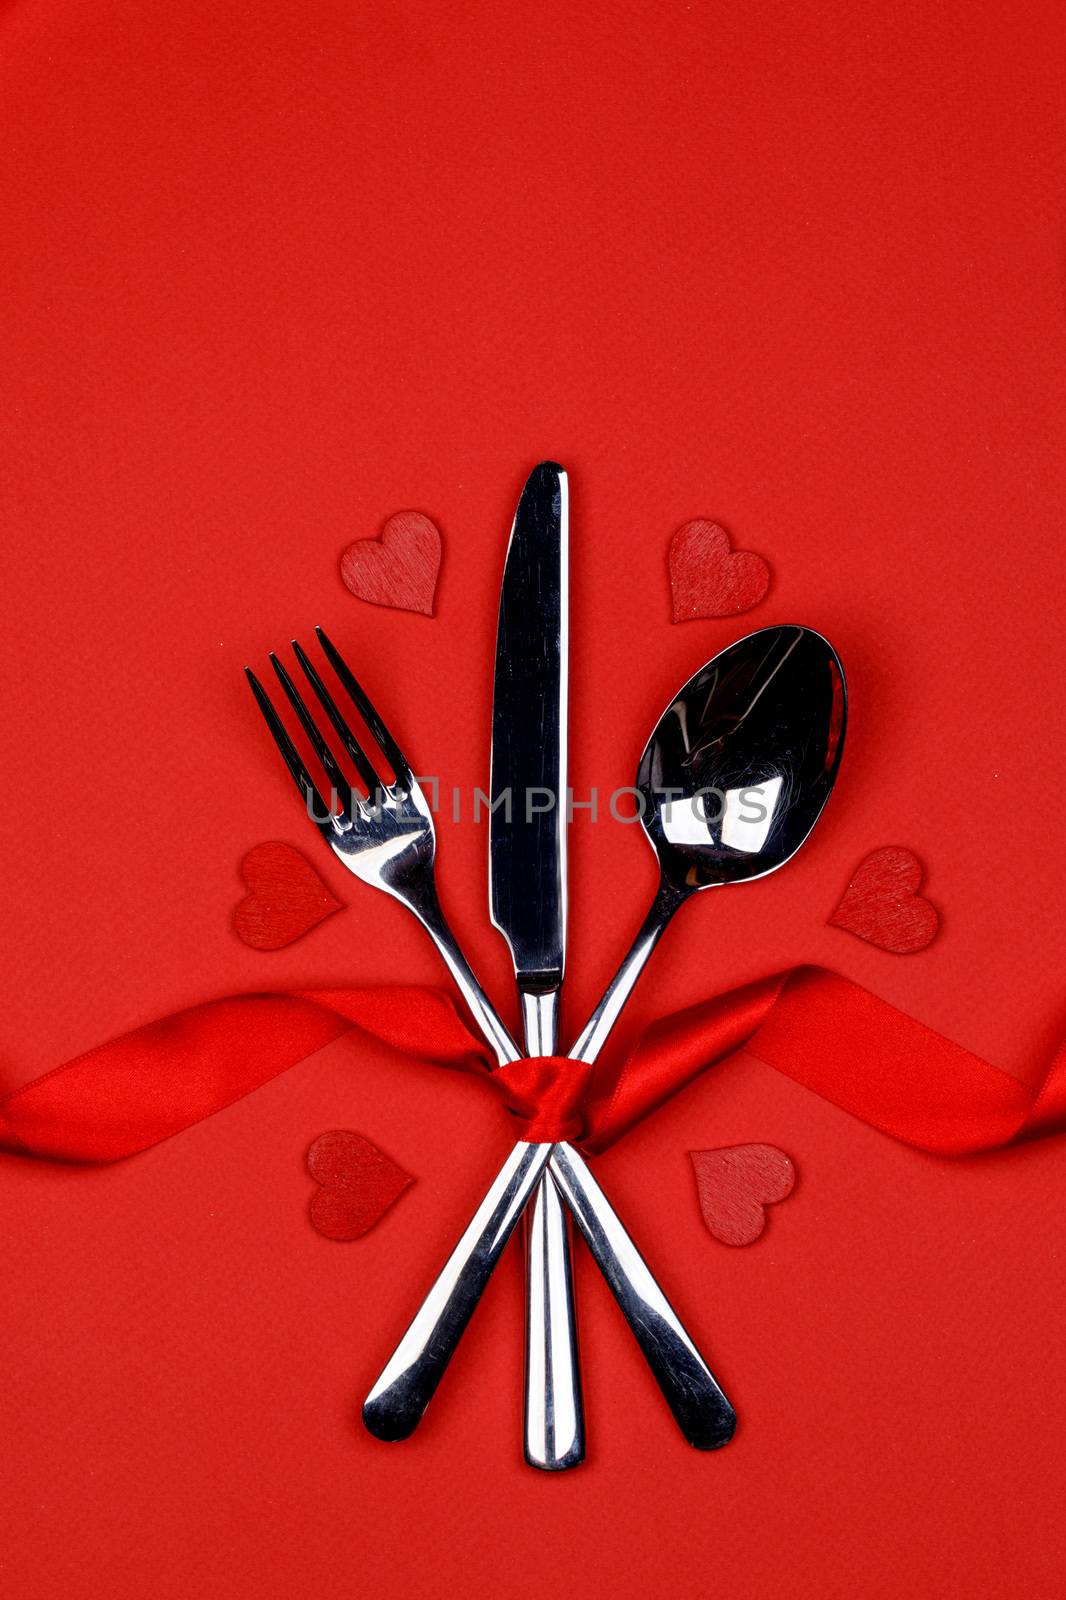 Cutlery set and hearts by Yellowj